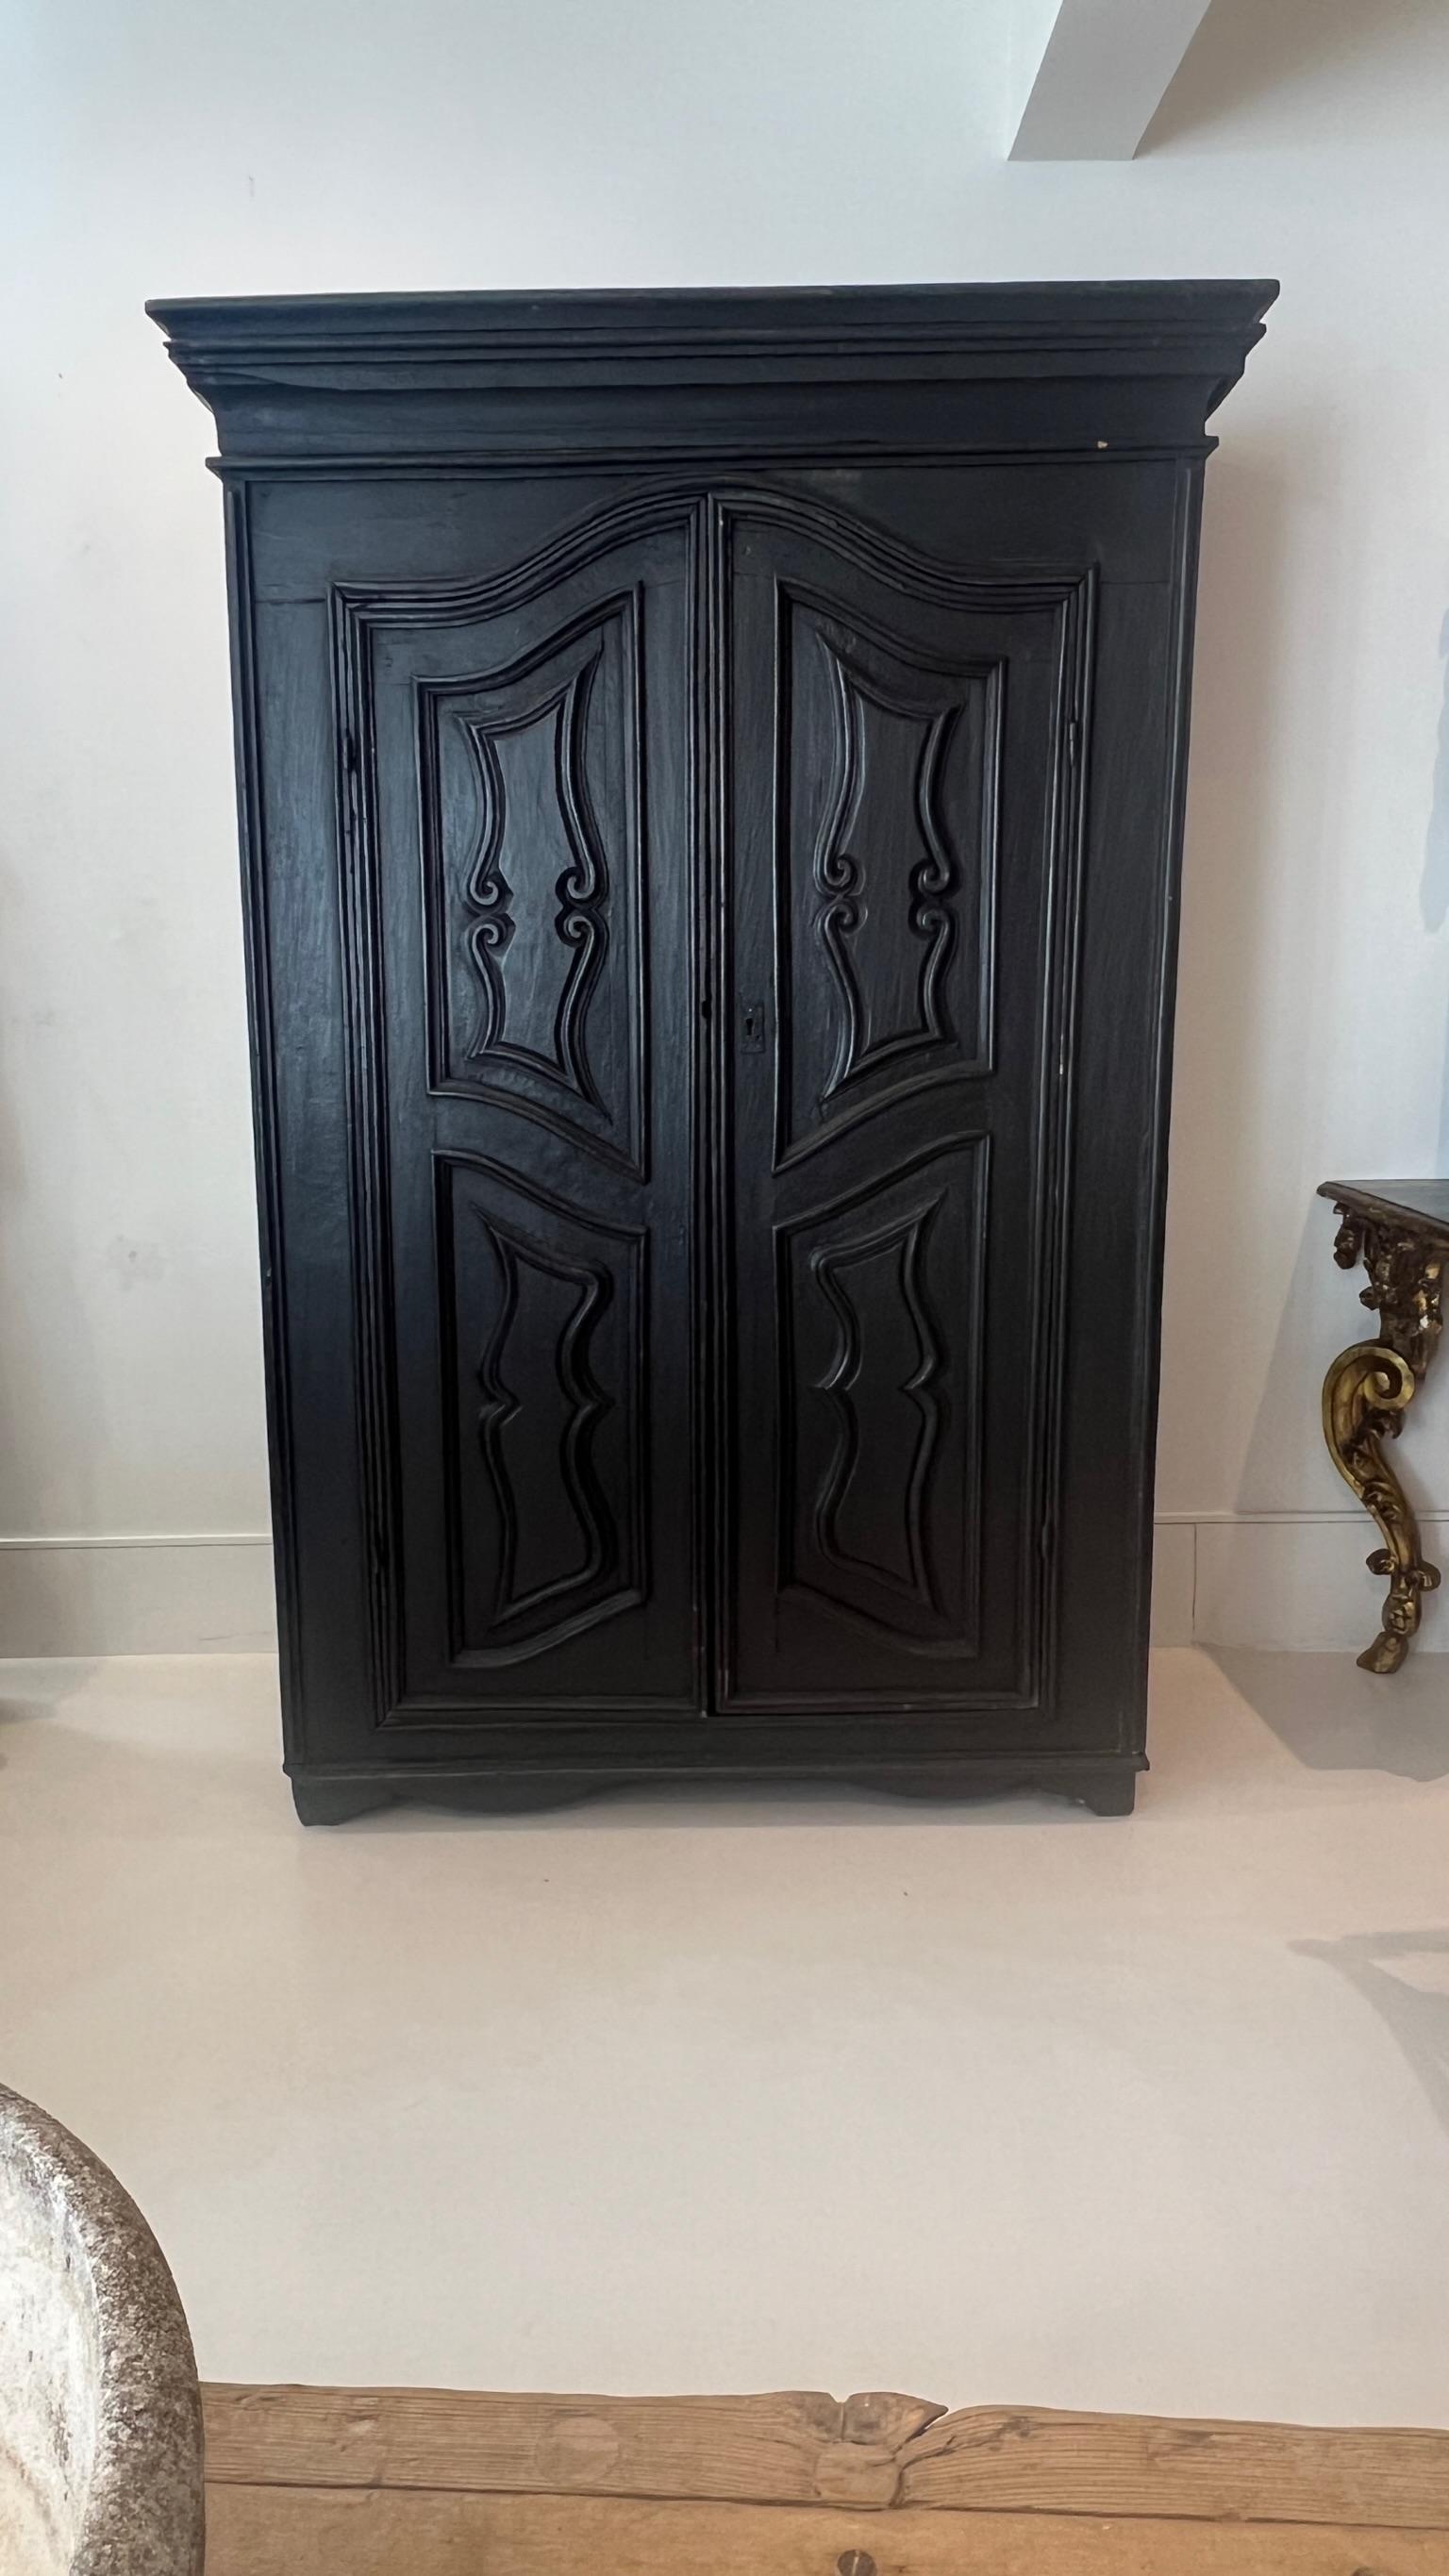 Striking all black armoire provides plenty of storage and a stand out piece in any decor.